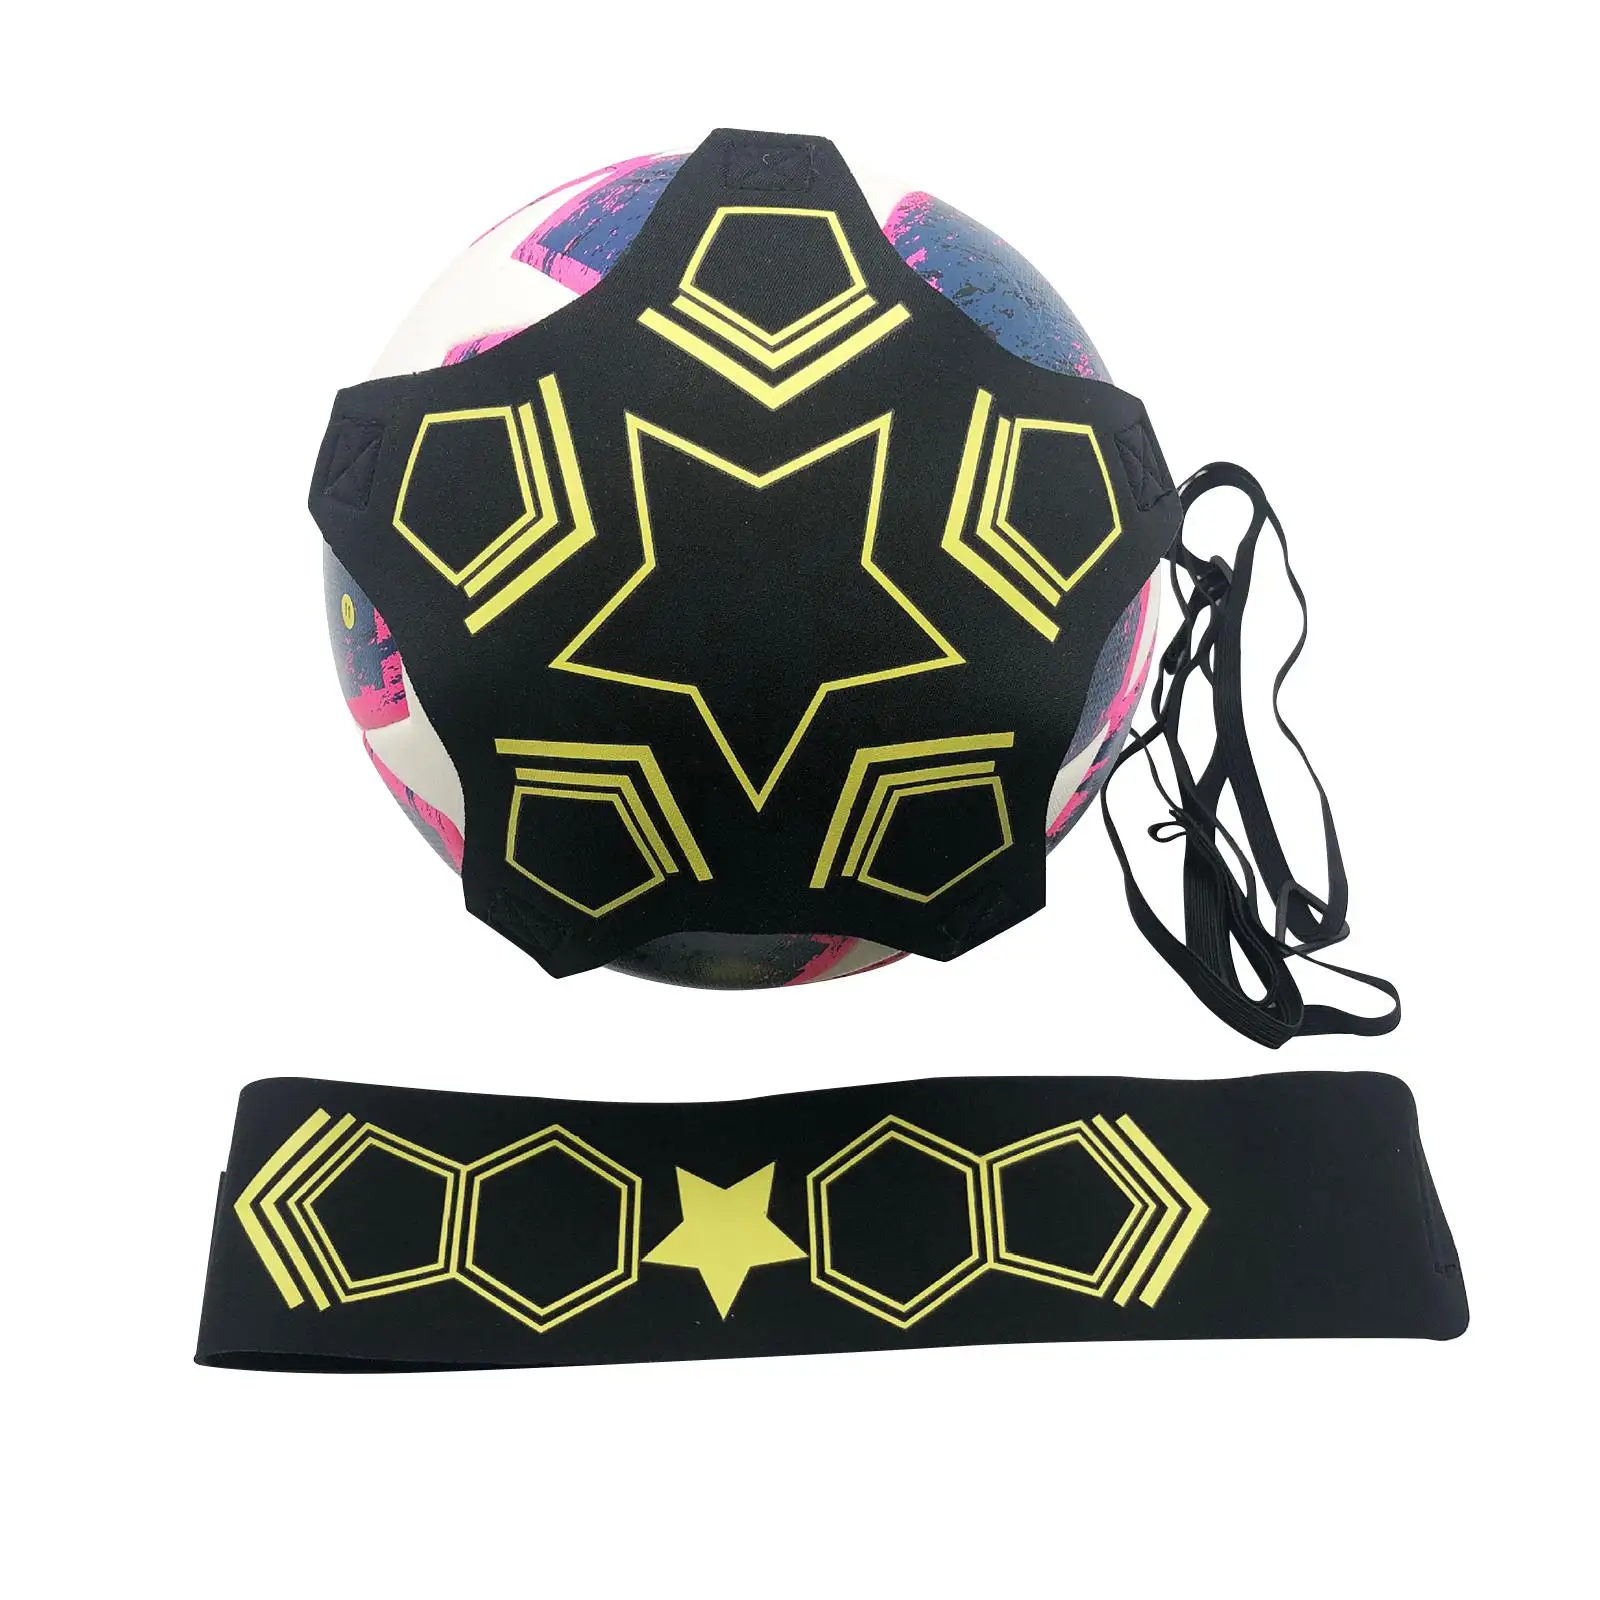 Kick Throw Solo Practice 1.8M Elastic Rope Soccer Trainer for Outdoor Rugby Volleyball